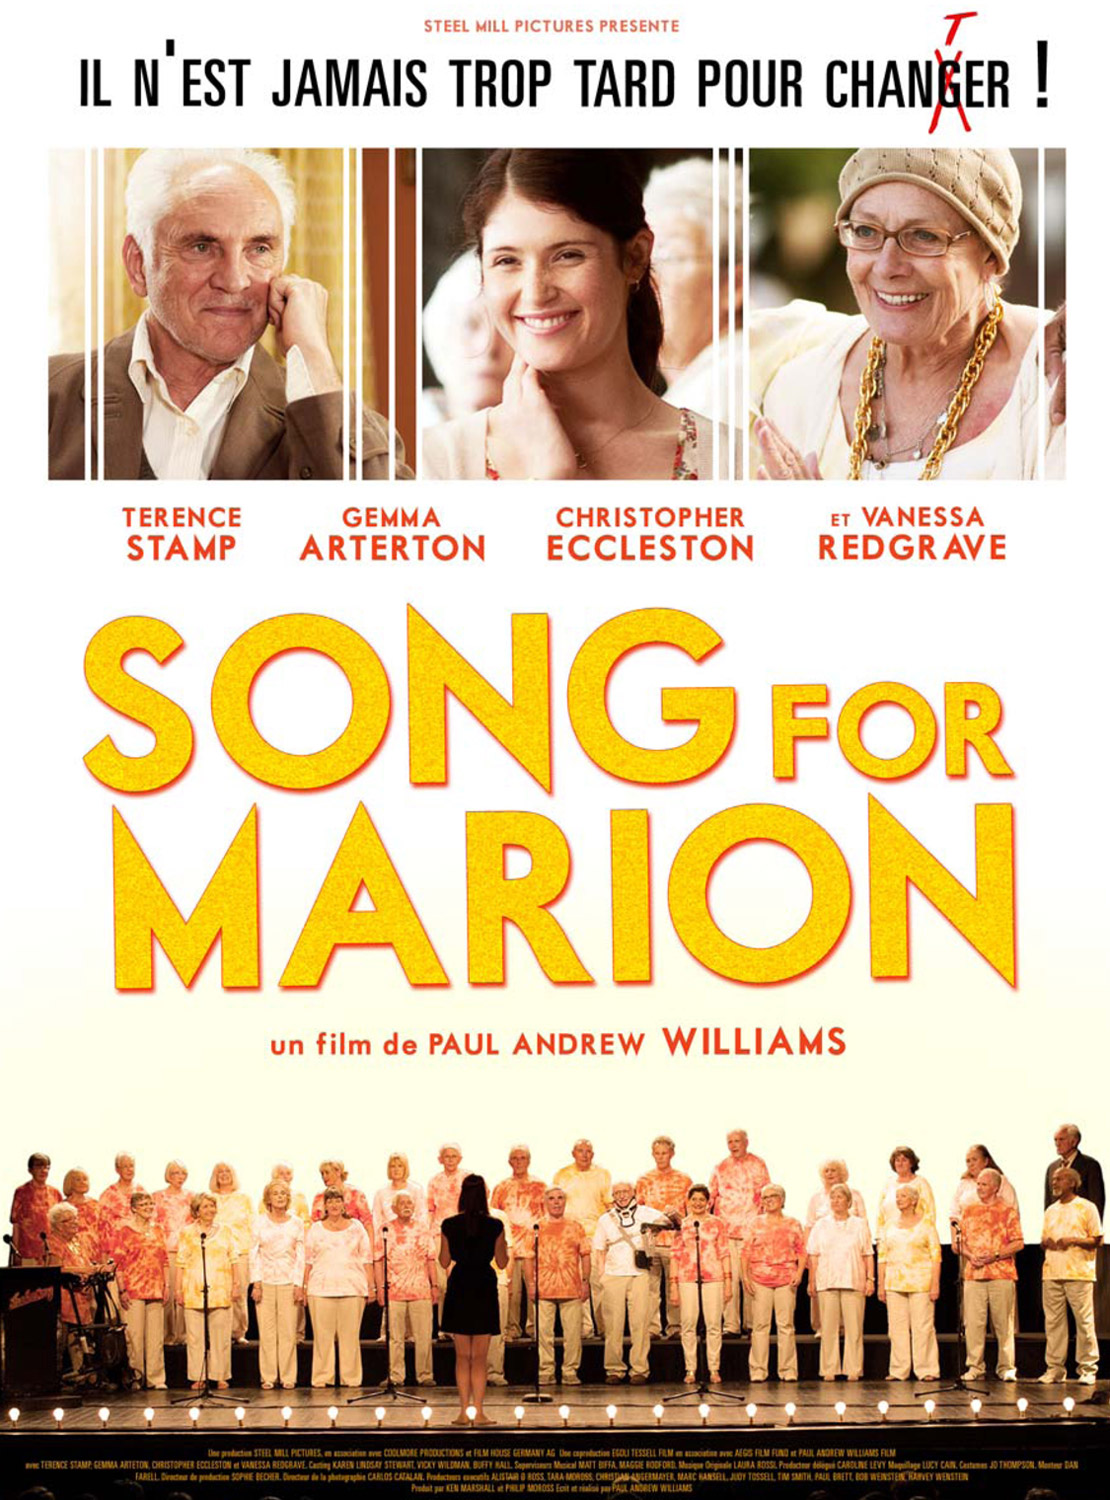 http://www.under-my-screen.com/wp-content/uploads/2013/11/affiche-Song-for-Marion-2012-1.jpg